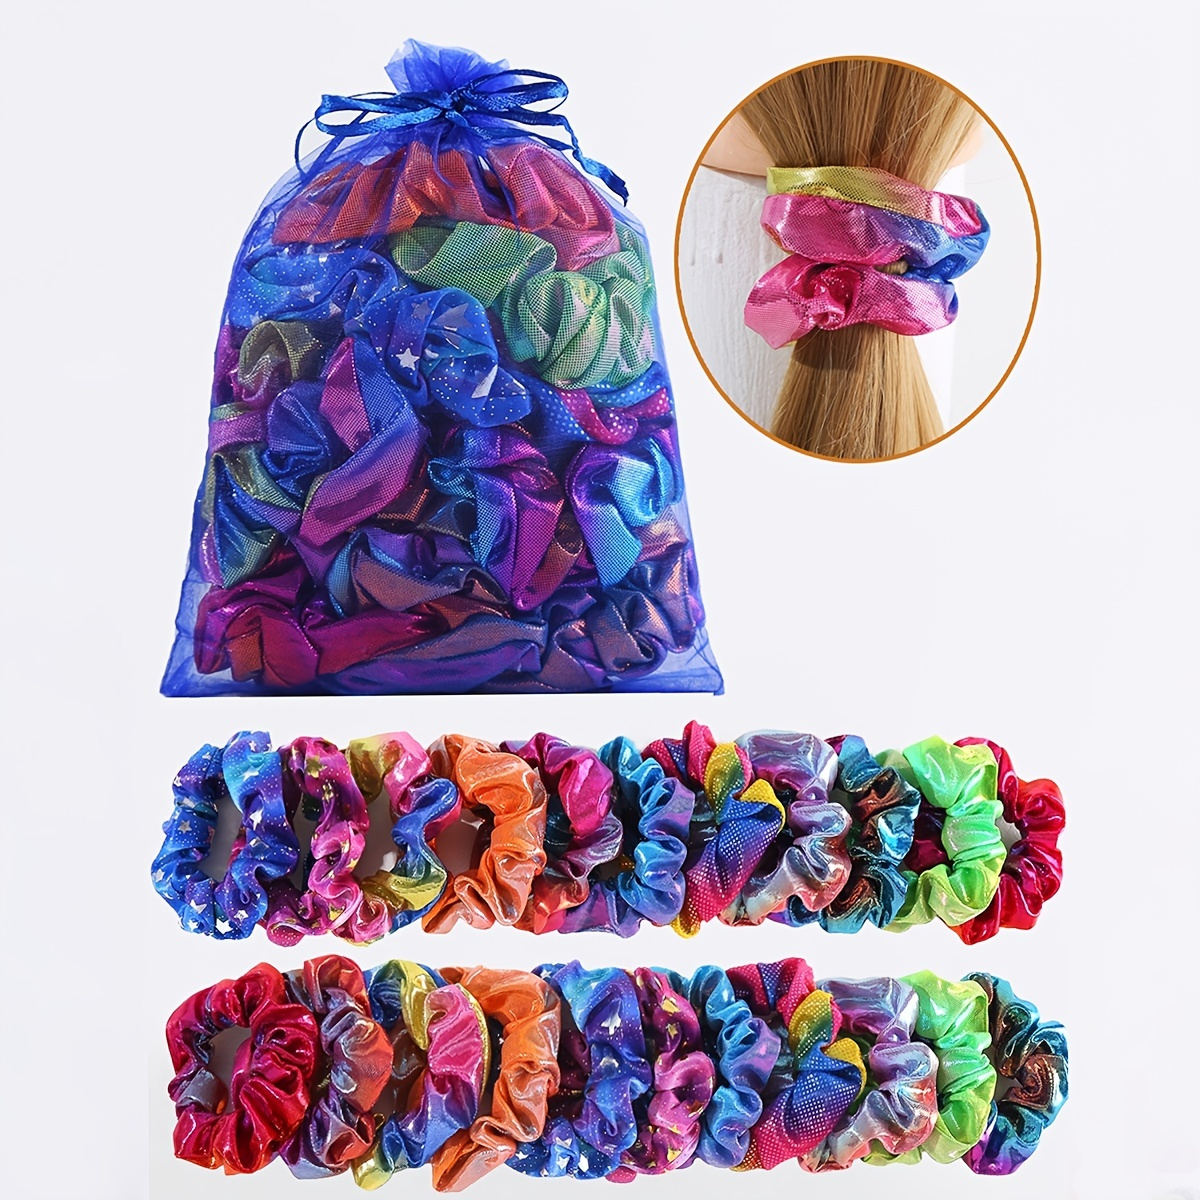 

20pcs Colorful Metallic Scrunchies - Shiny Mermaid Hair Ties For Women And - Elasticated Neon Hair Ties For Ponytail Holder And Hair Accessories